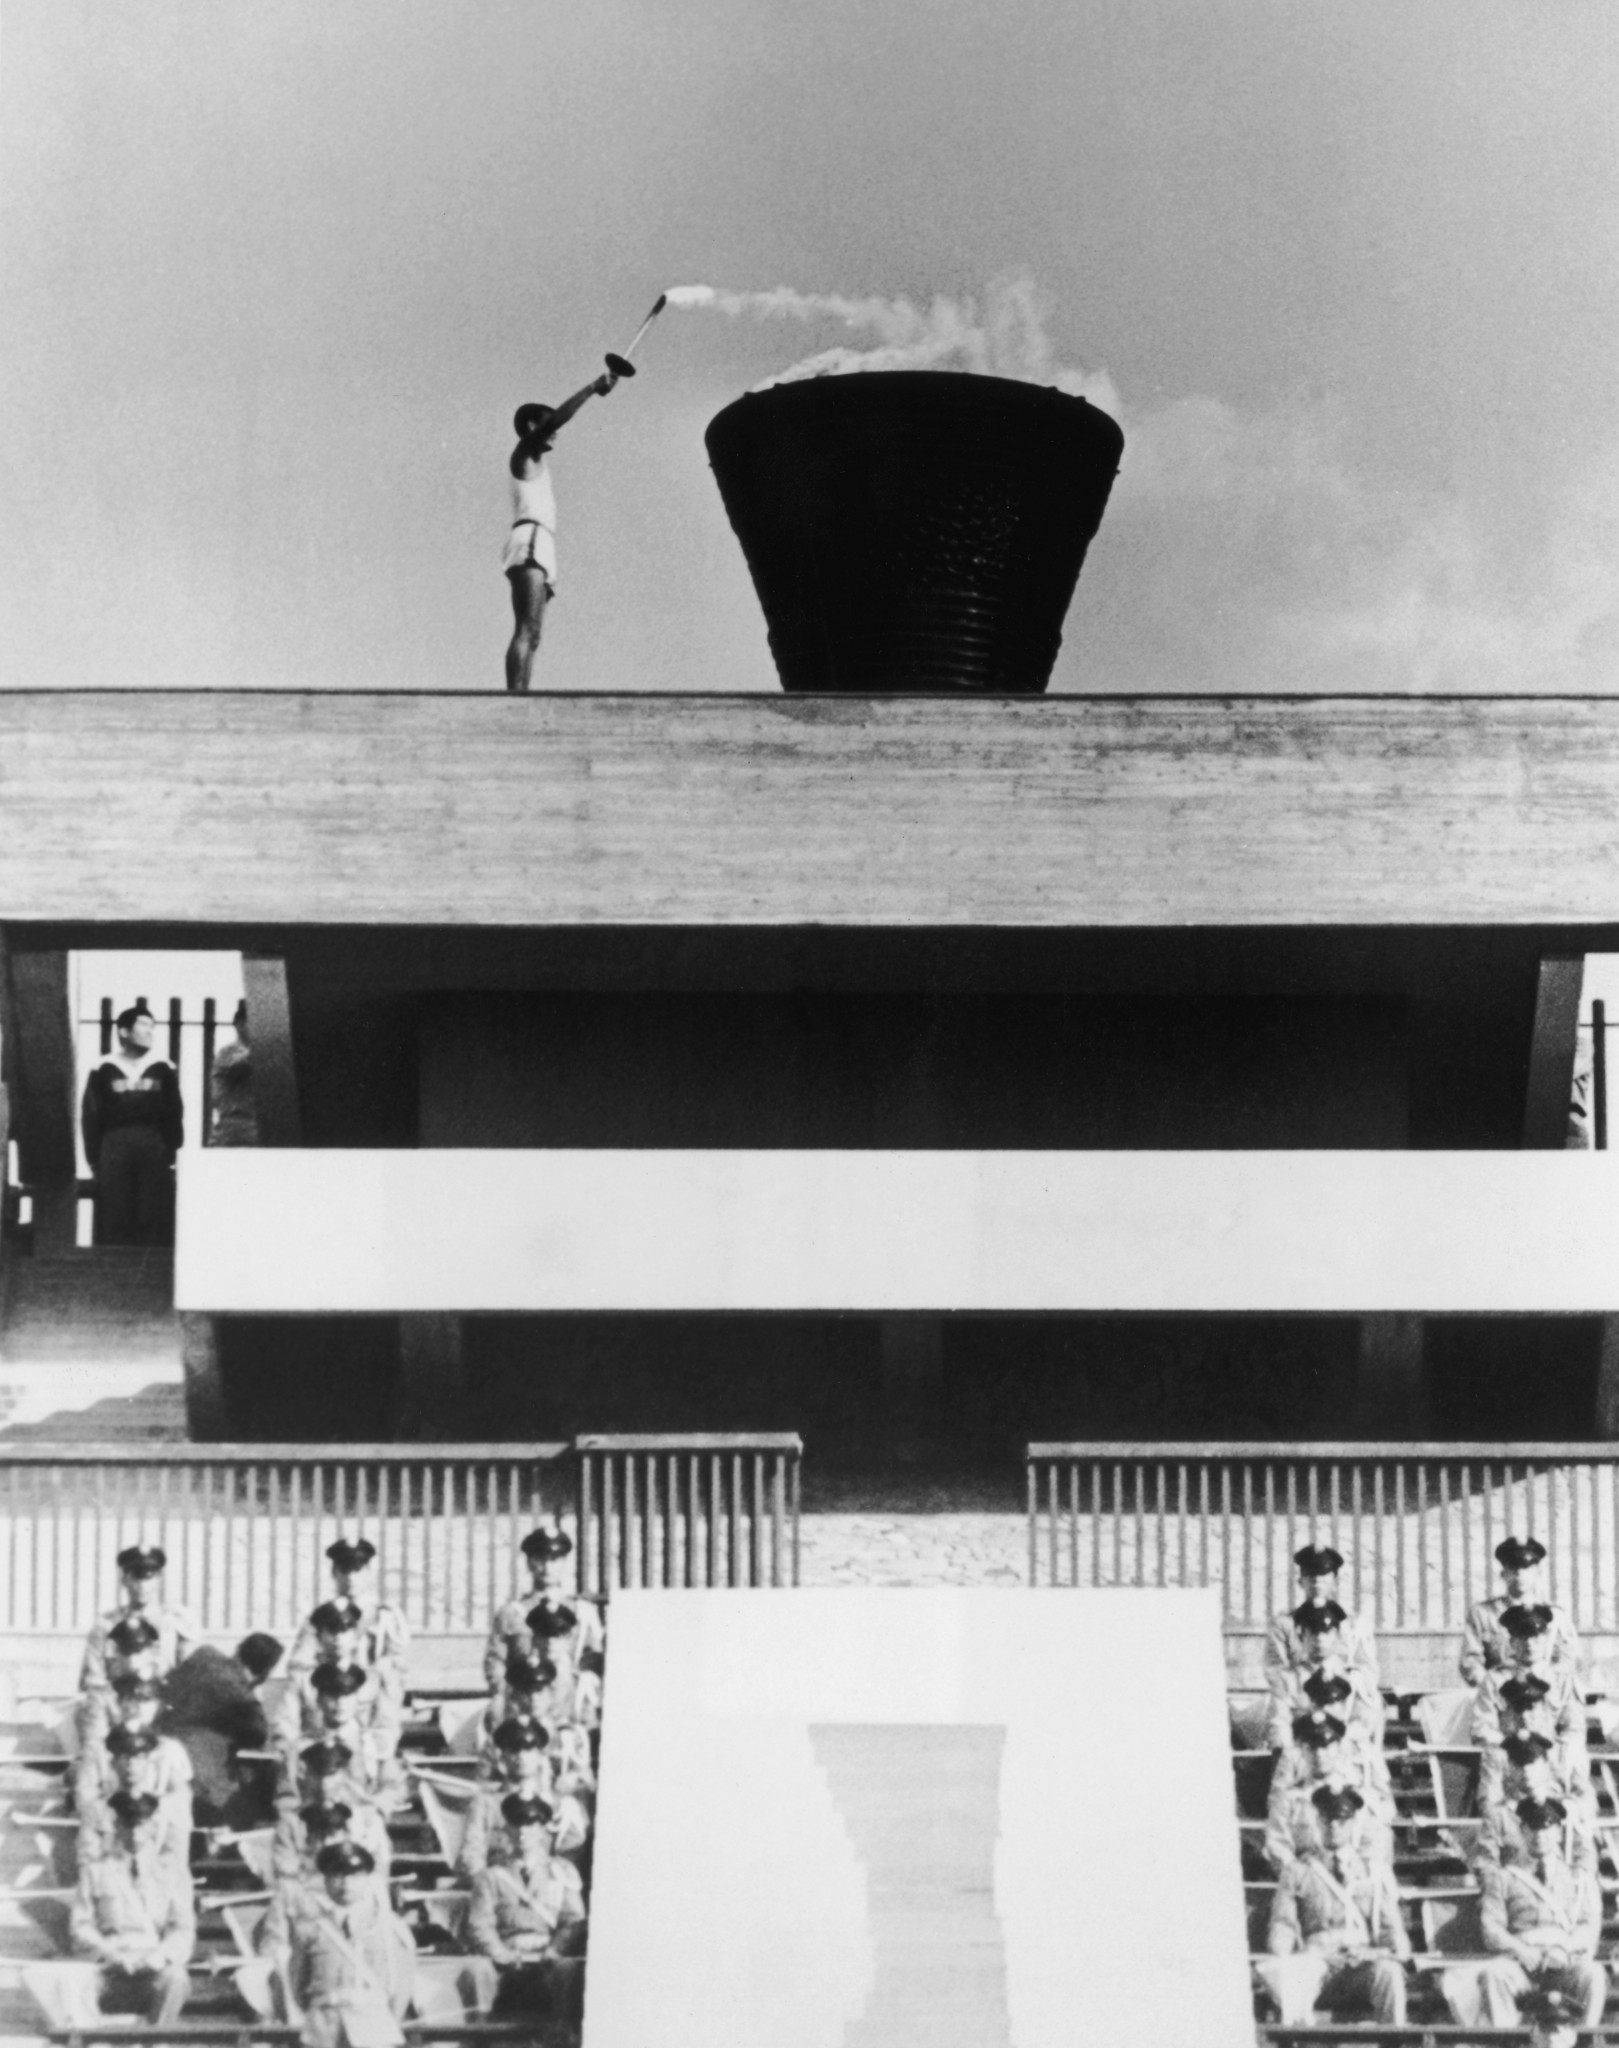 Eternal flame from Tokyo 1964 Olympics was relit four years ago